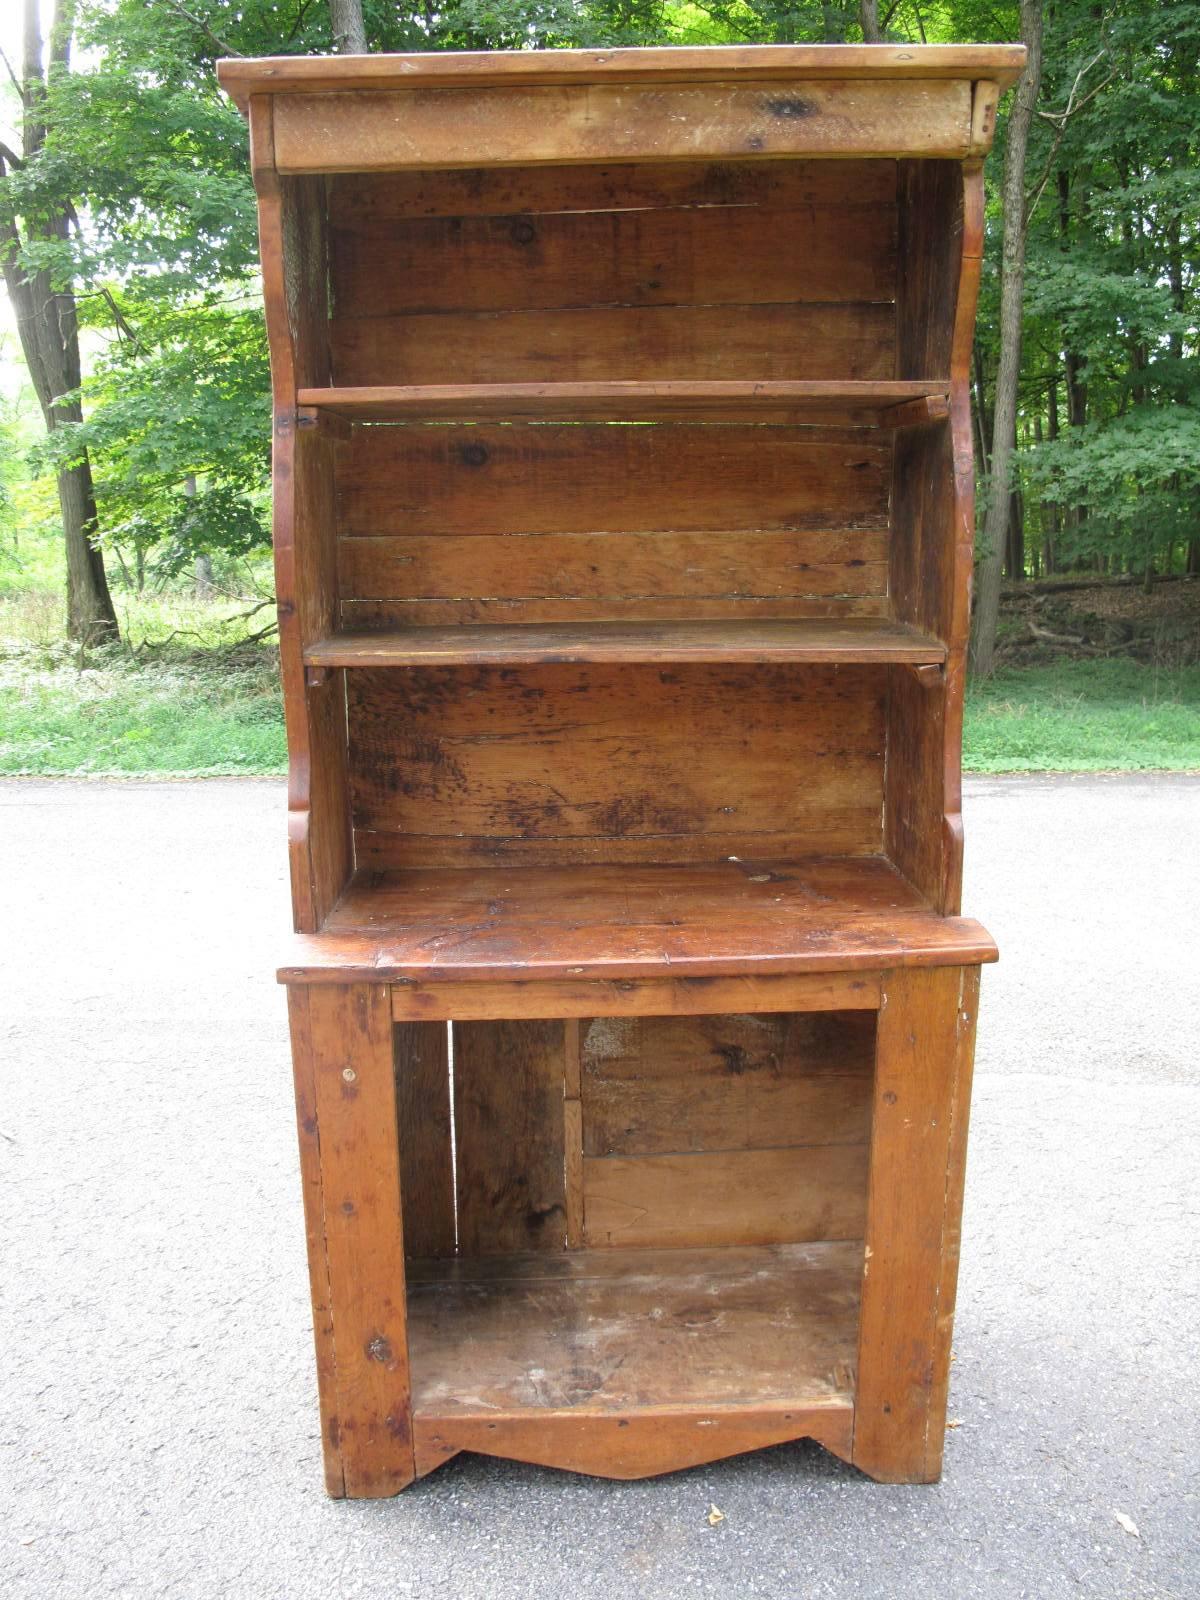 18th century American step back cupboard. Handmade construction. Two removable plank shelves.